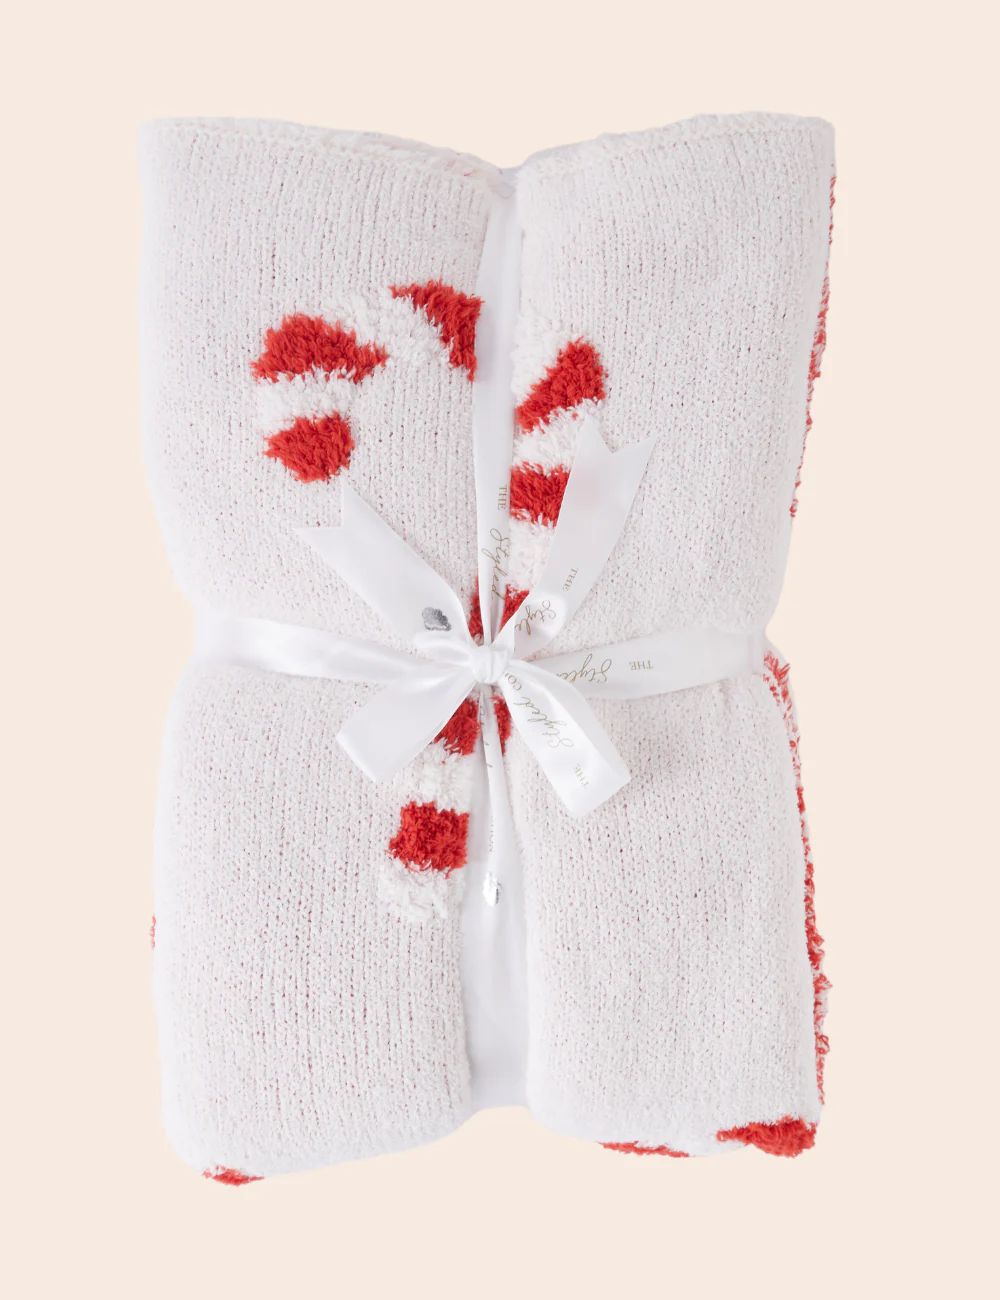 TSC x Madi Nelson: Candy Cane Buttery Blanket- Sold out | The Styled Collection